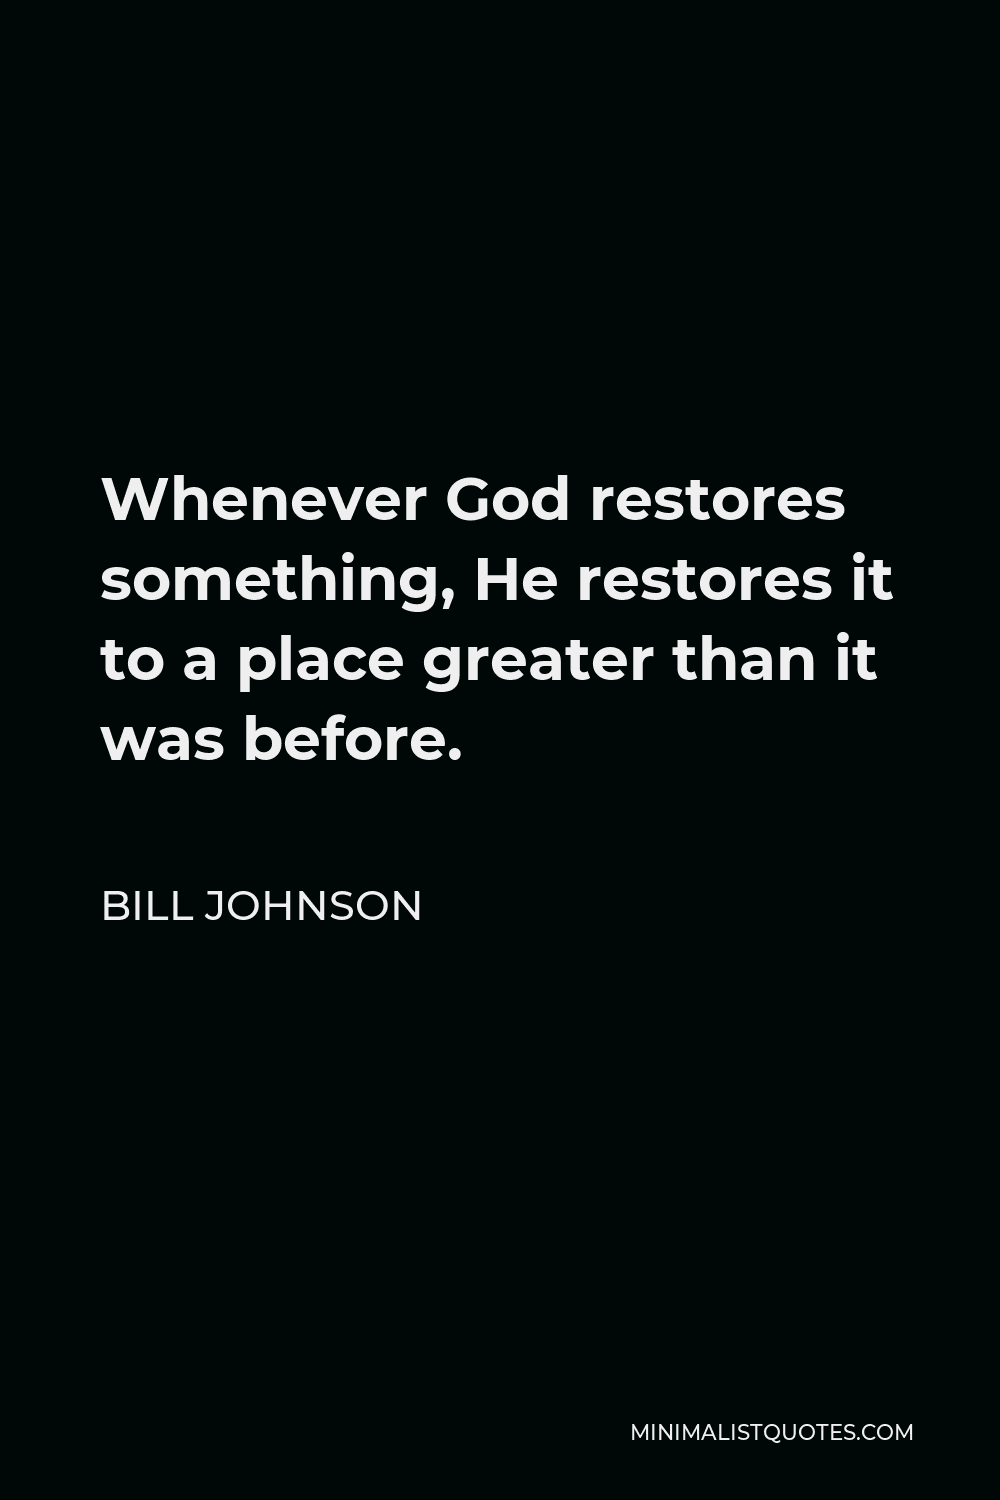 Bill Johnson Quote - Whenever God restores something, He restores it to a place greater than it was before.